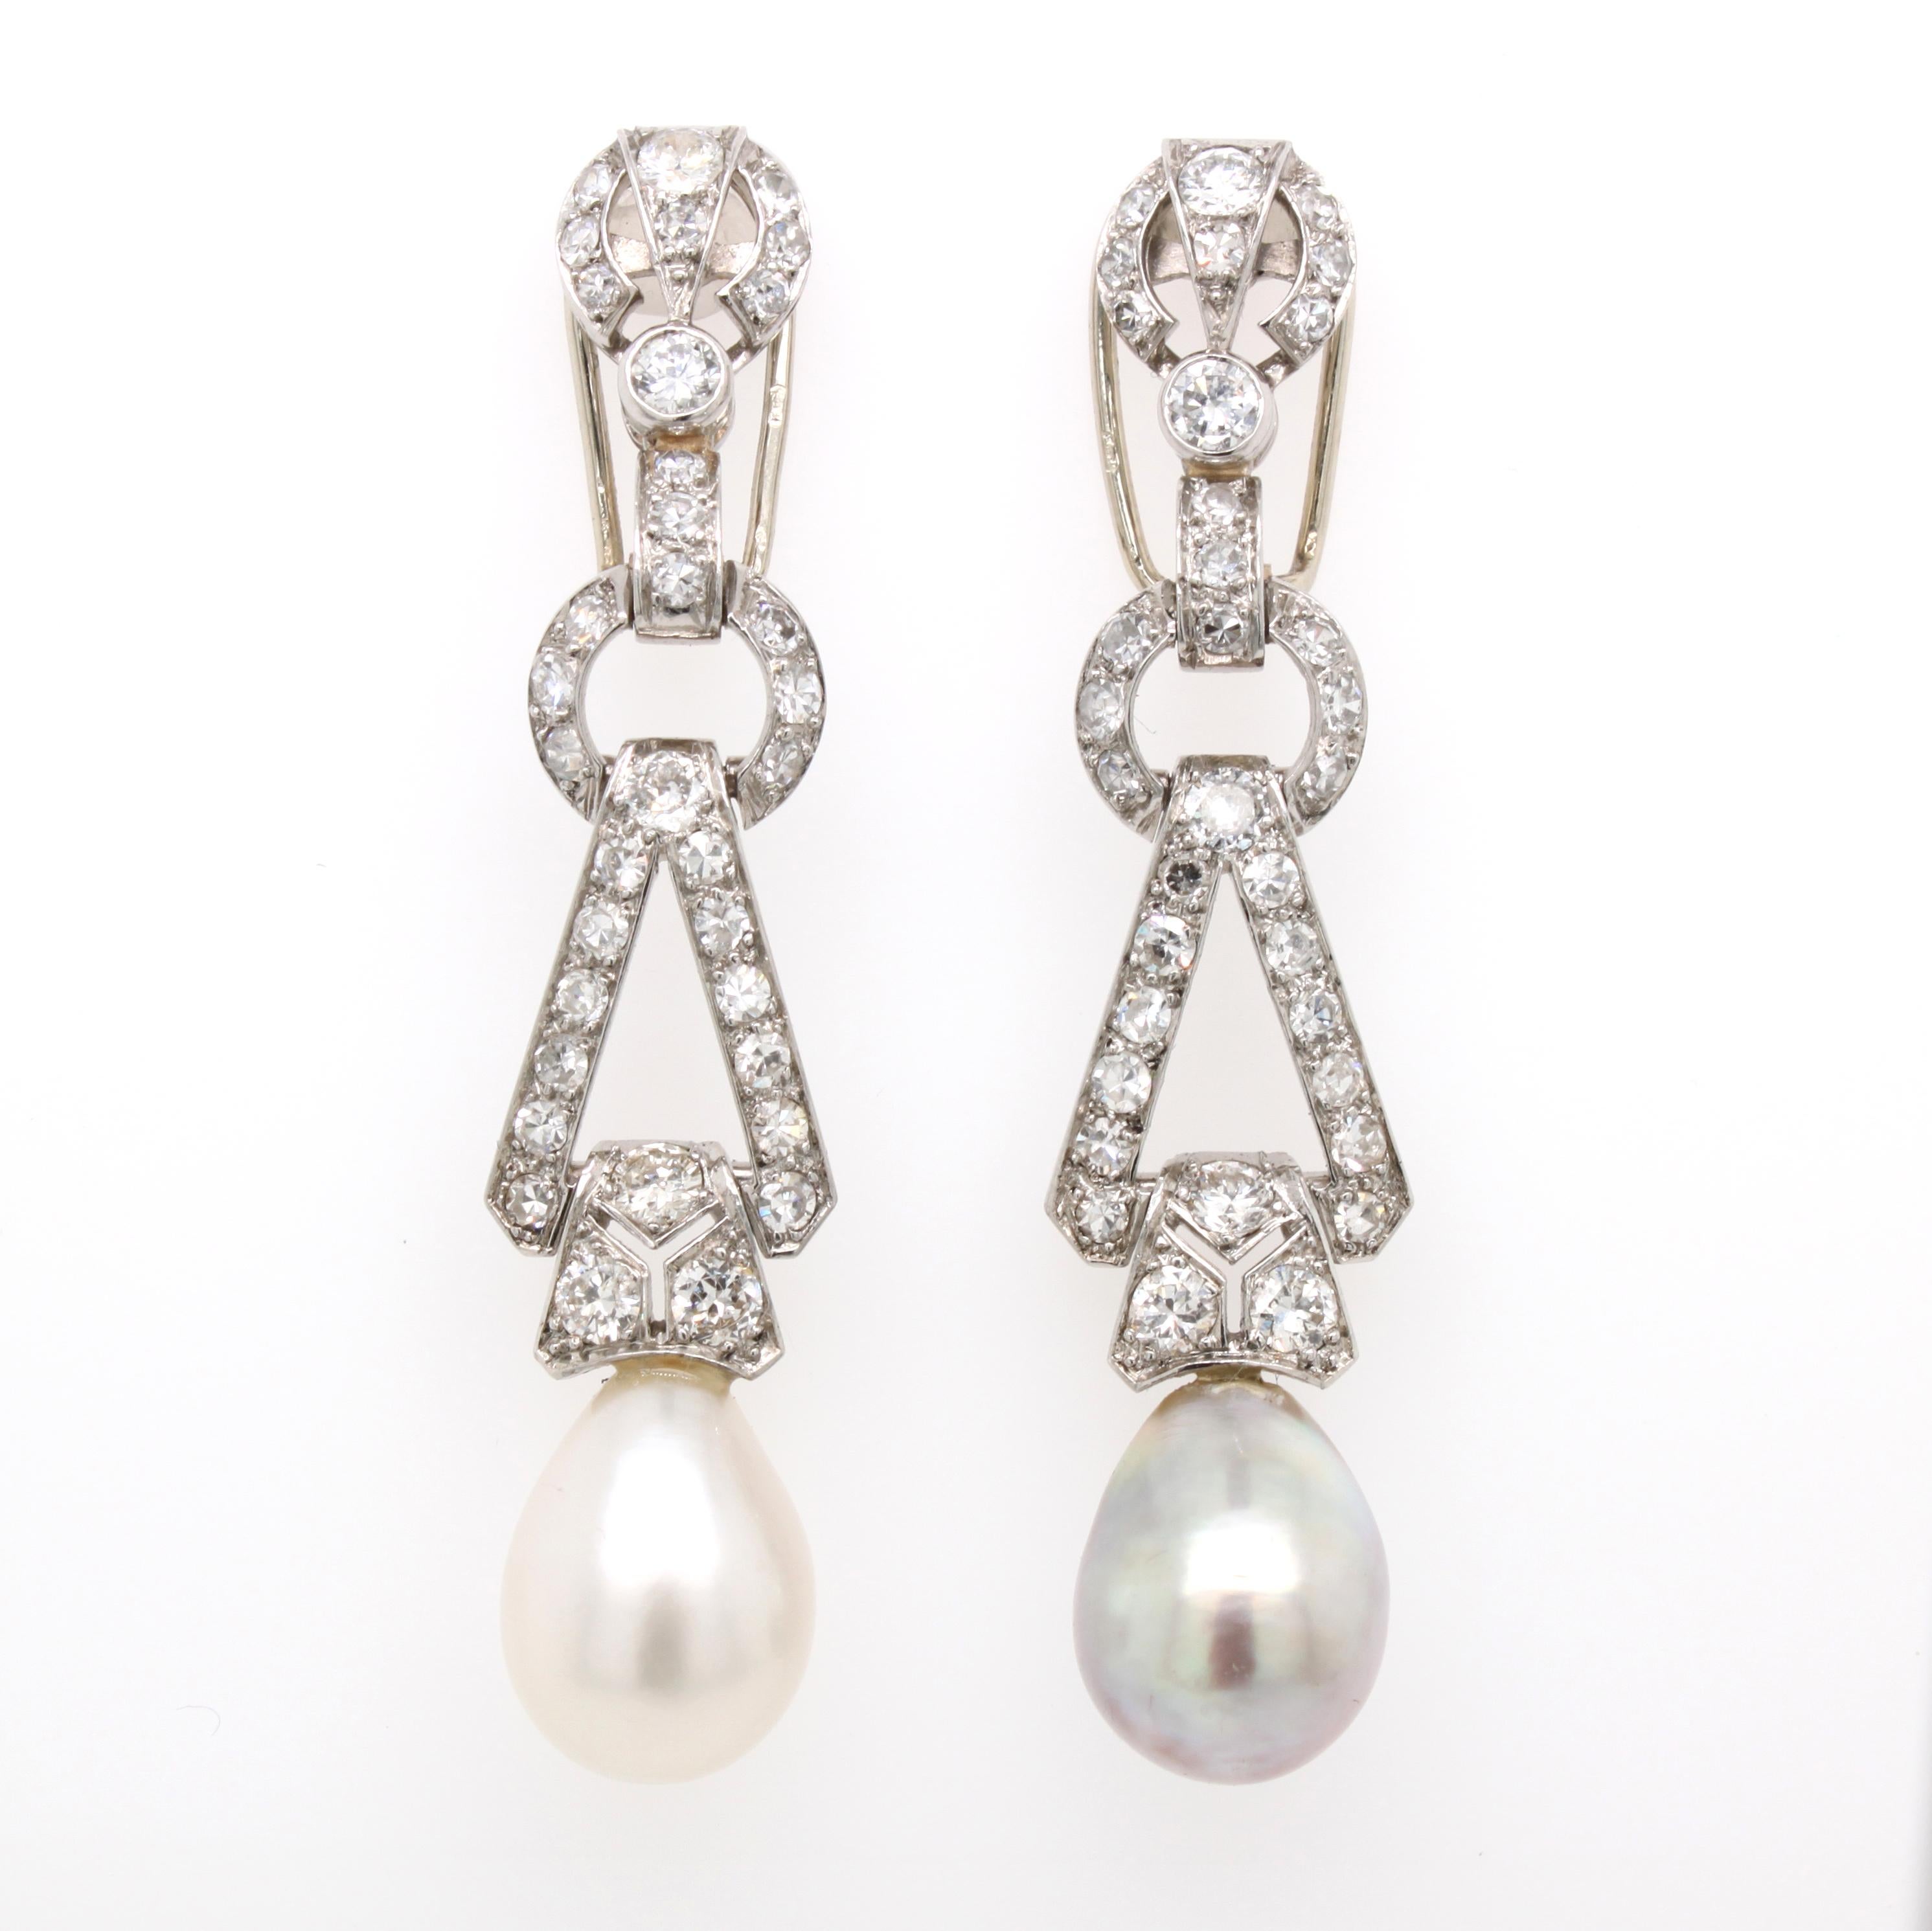 Women's Art Deco Natural Saltwater Pearl and Diamond Earrings, ca. 1920s